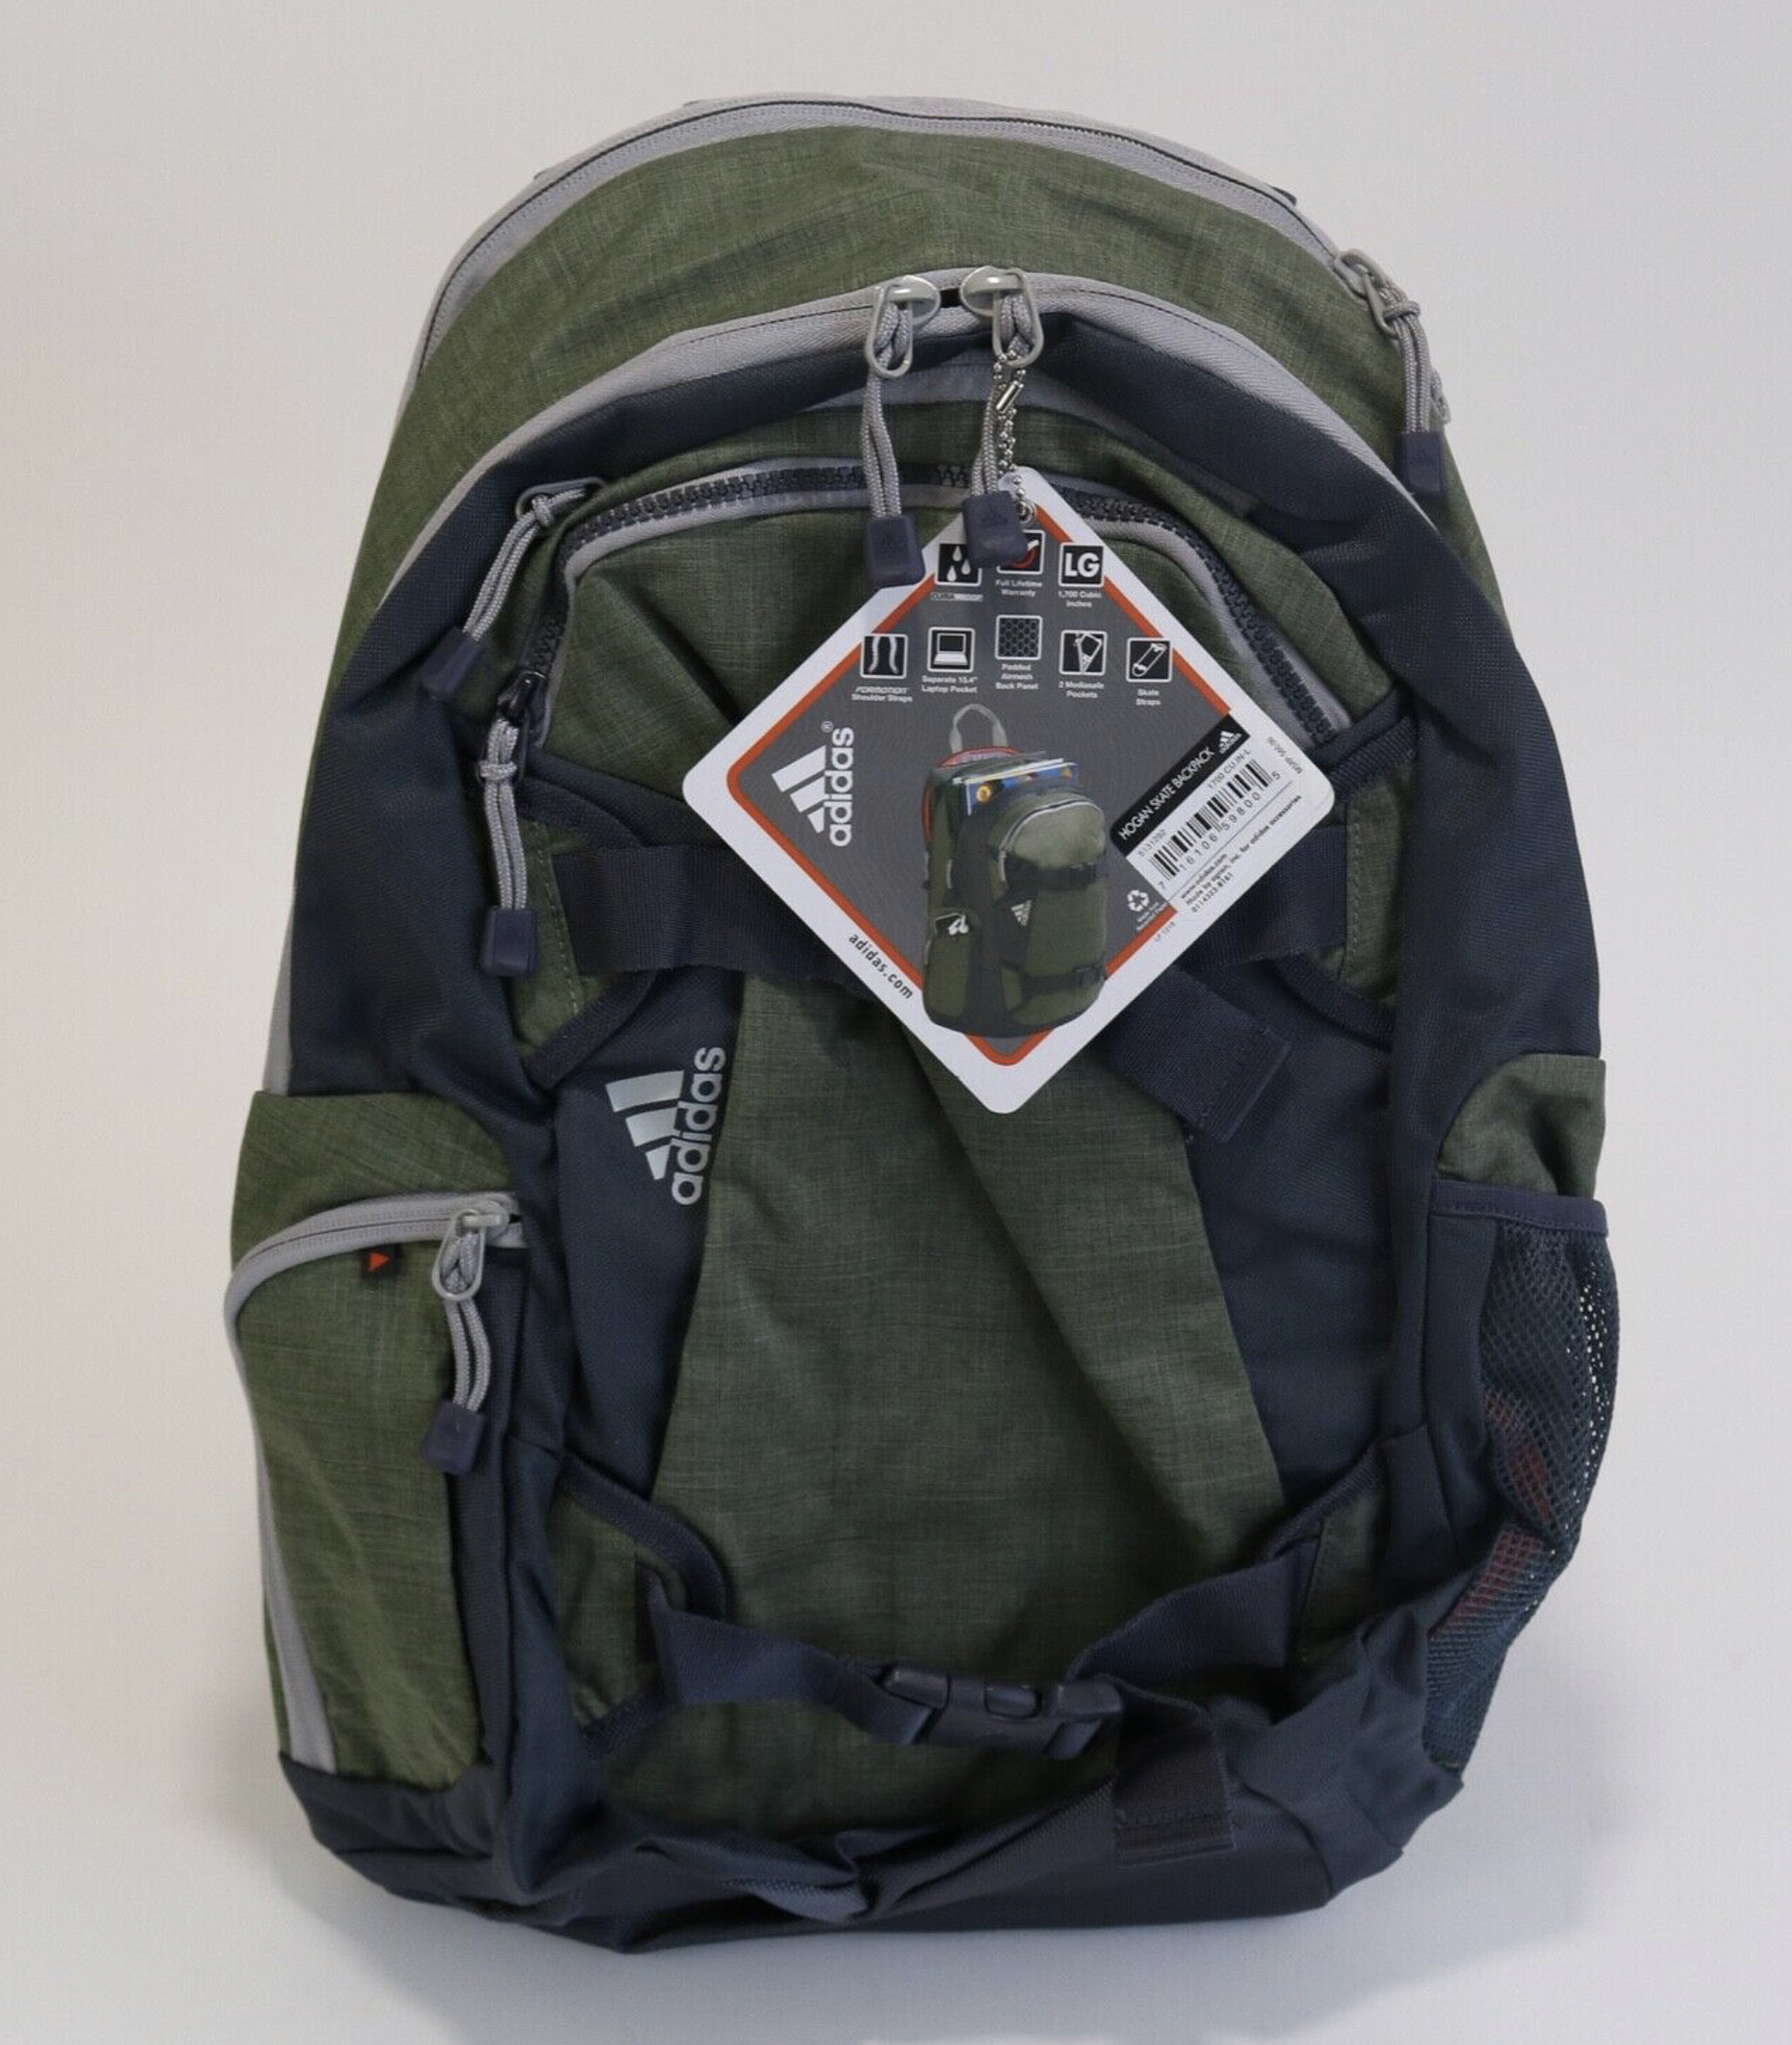 Adidas ClimaProof Formotion Hogan Skate Backpack School Pack Laptop Bag Green - 3 Available - $35 each